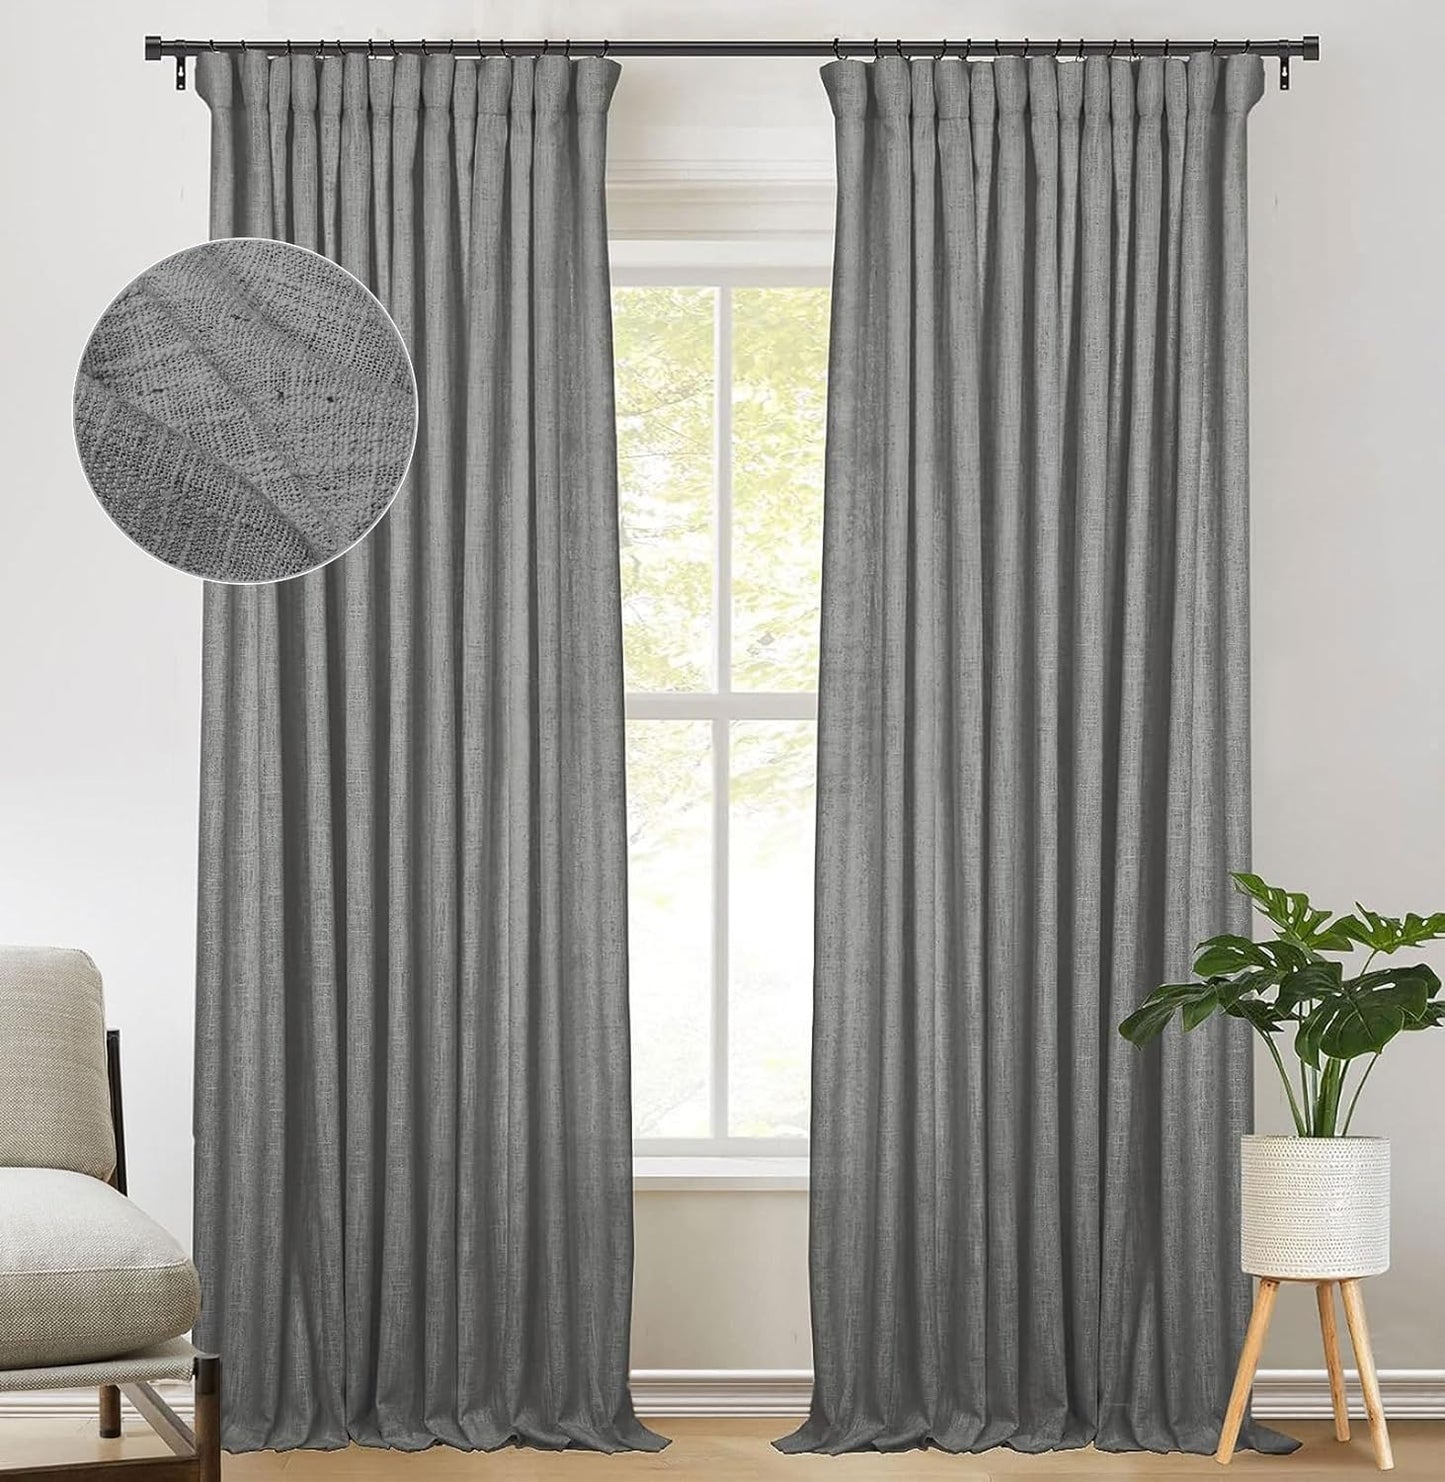 Zeerobee Beige White Linen Curtains for Living Room/Bedroom Linen Curtains 96 Inches Long 2 Panels Linen Drapes Farmhouse Pinch Pleated Curtains Light Filtering Privacy Curtains, W50 X L96  zeerobee 11 Flagstone 50"W X 108"L 